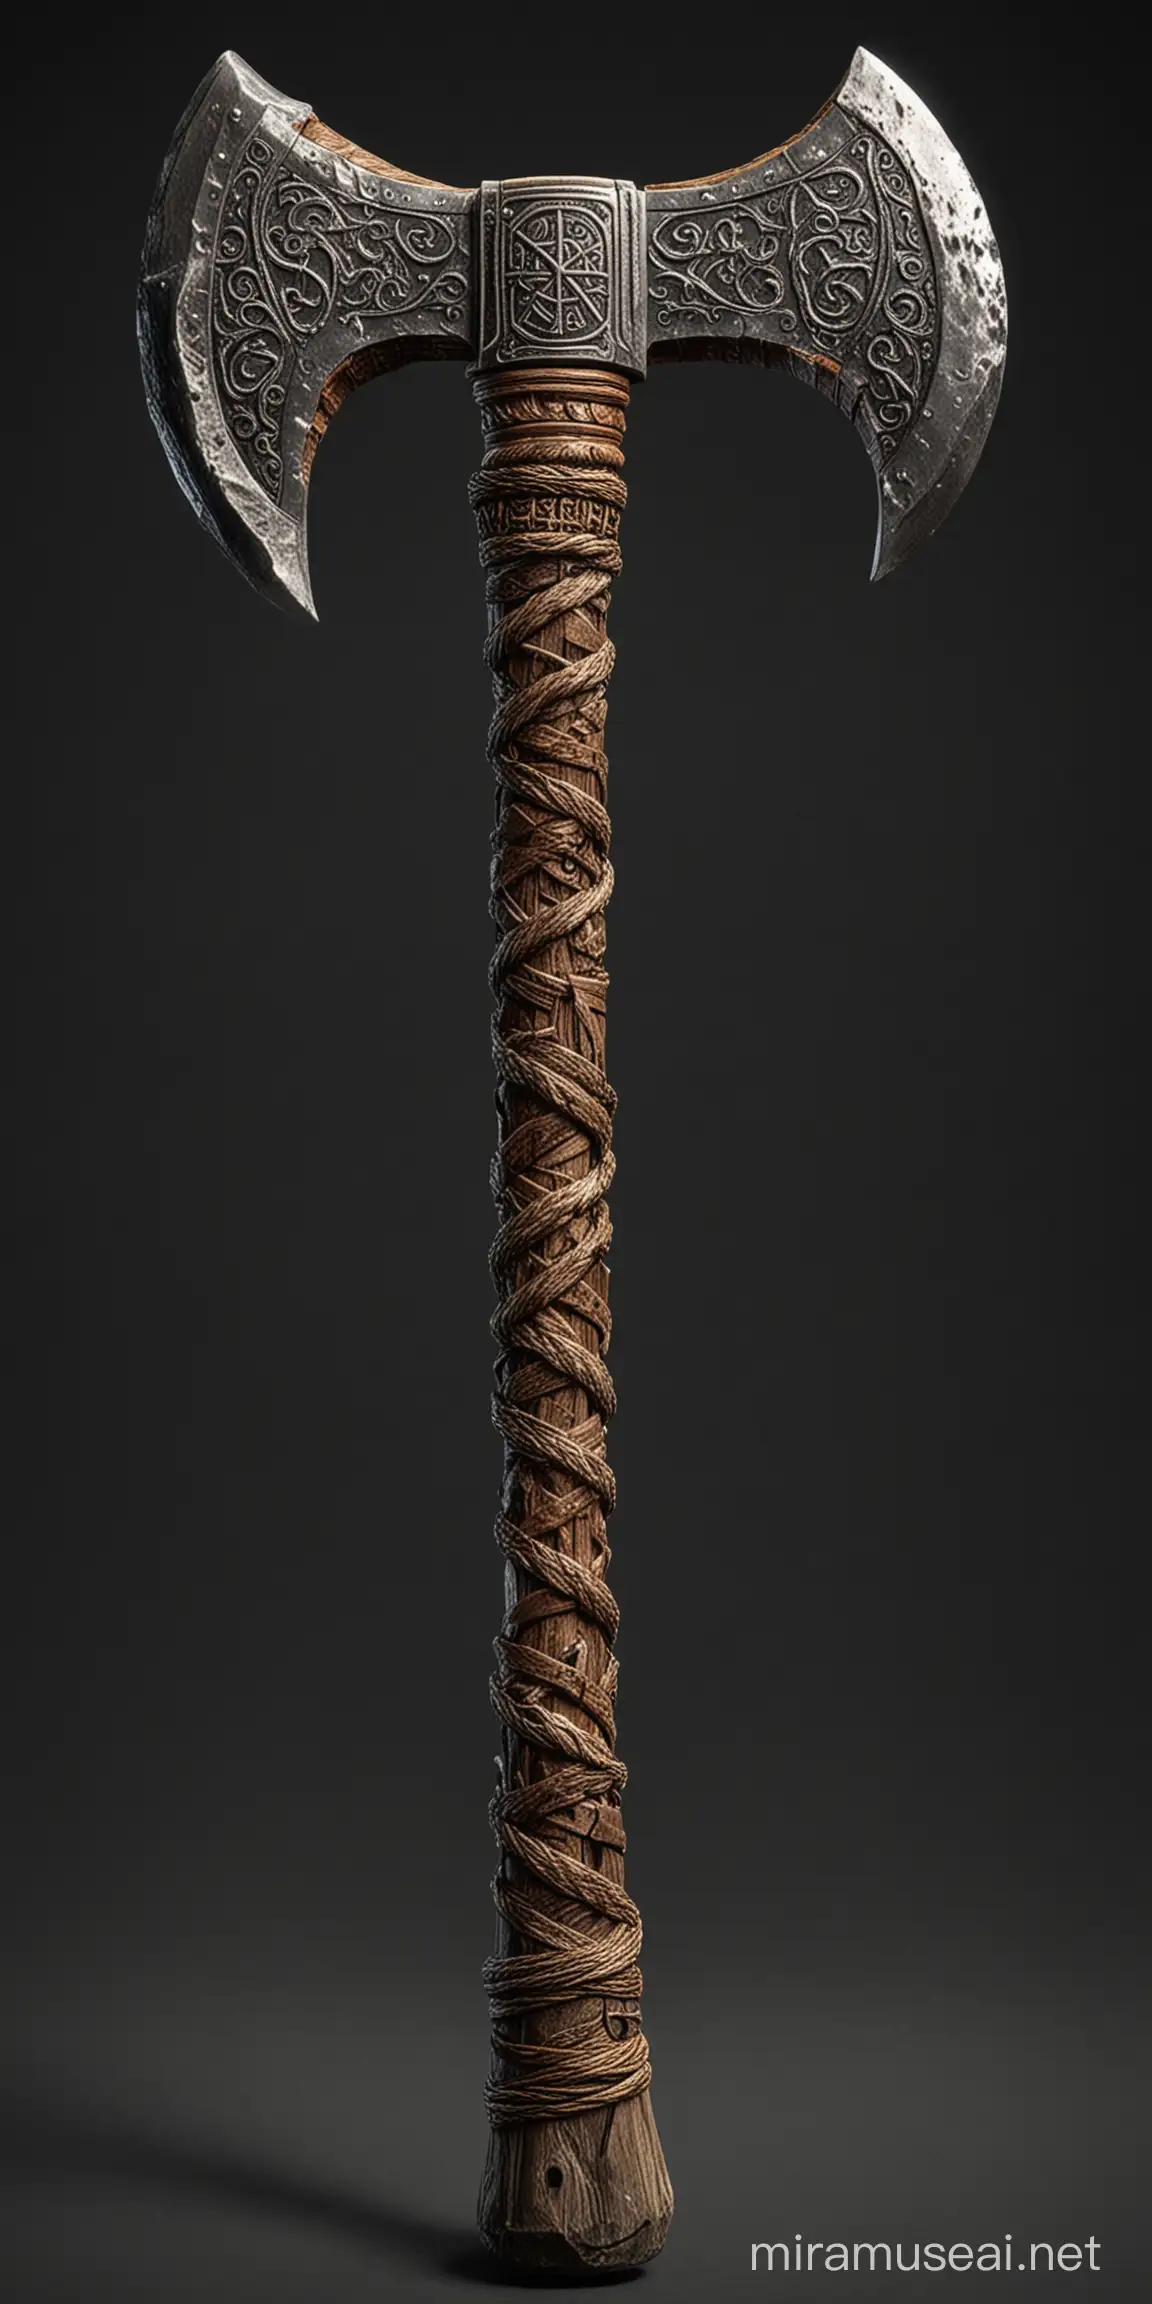 The image features a large, two sided ornate axe with a wooden handle. its a fantastic game item. barbarian viking, orc axe. The axe has a metallic head with intricate designs and a spiked edge. The handle is wrapped with multiple strands of rope or twine, creating a pattern that adds to the axe's aesthetic appeal. The background is black, which contrasts with the axe and highlights its details. two side axe full body no shadow black bacground, arty, concept art, unique, giant